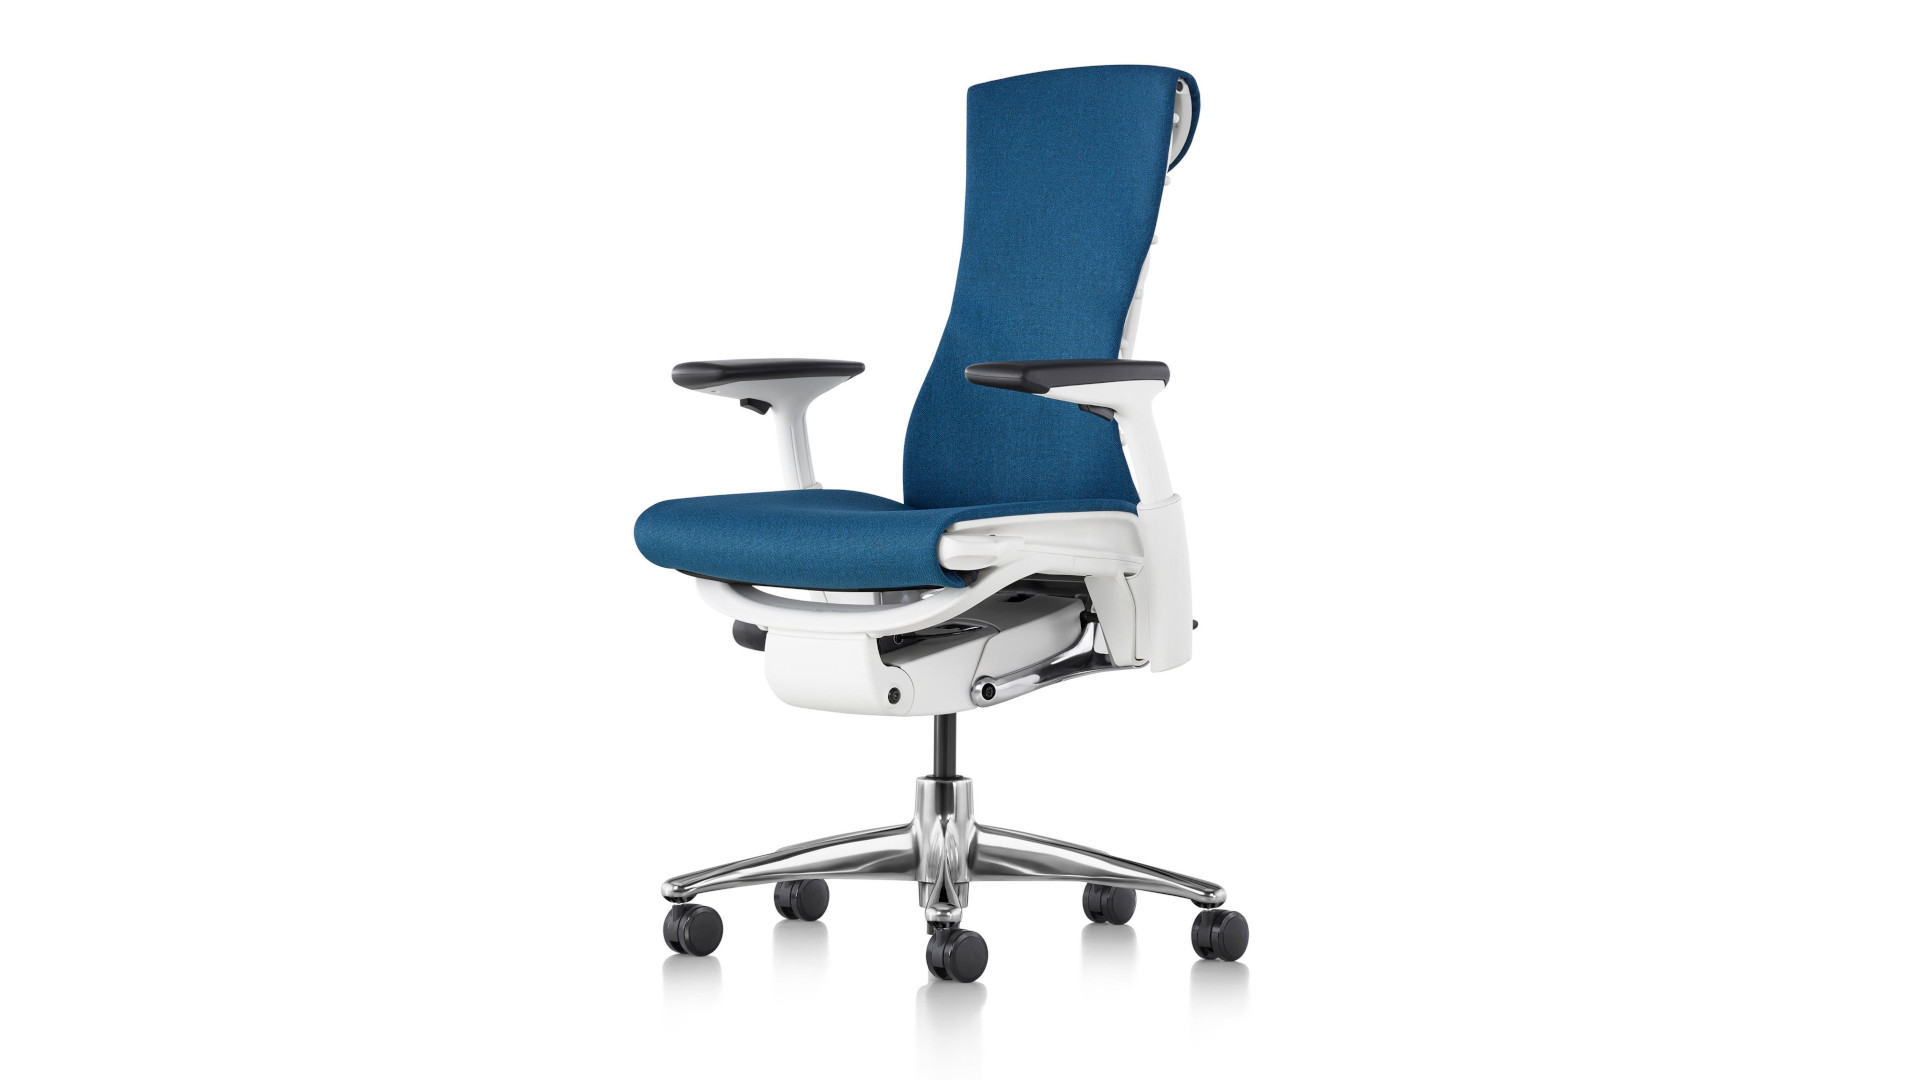 The Herman Miller Embody Logitech edition gaming chair